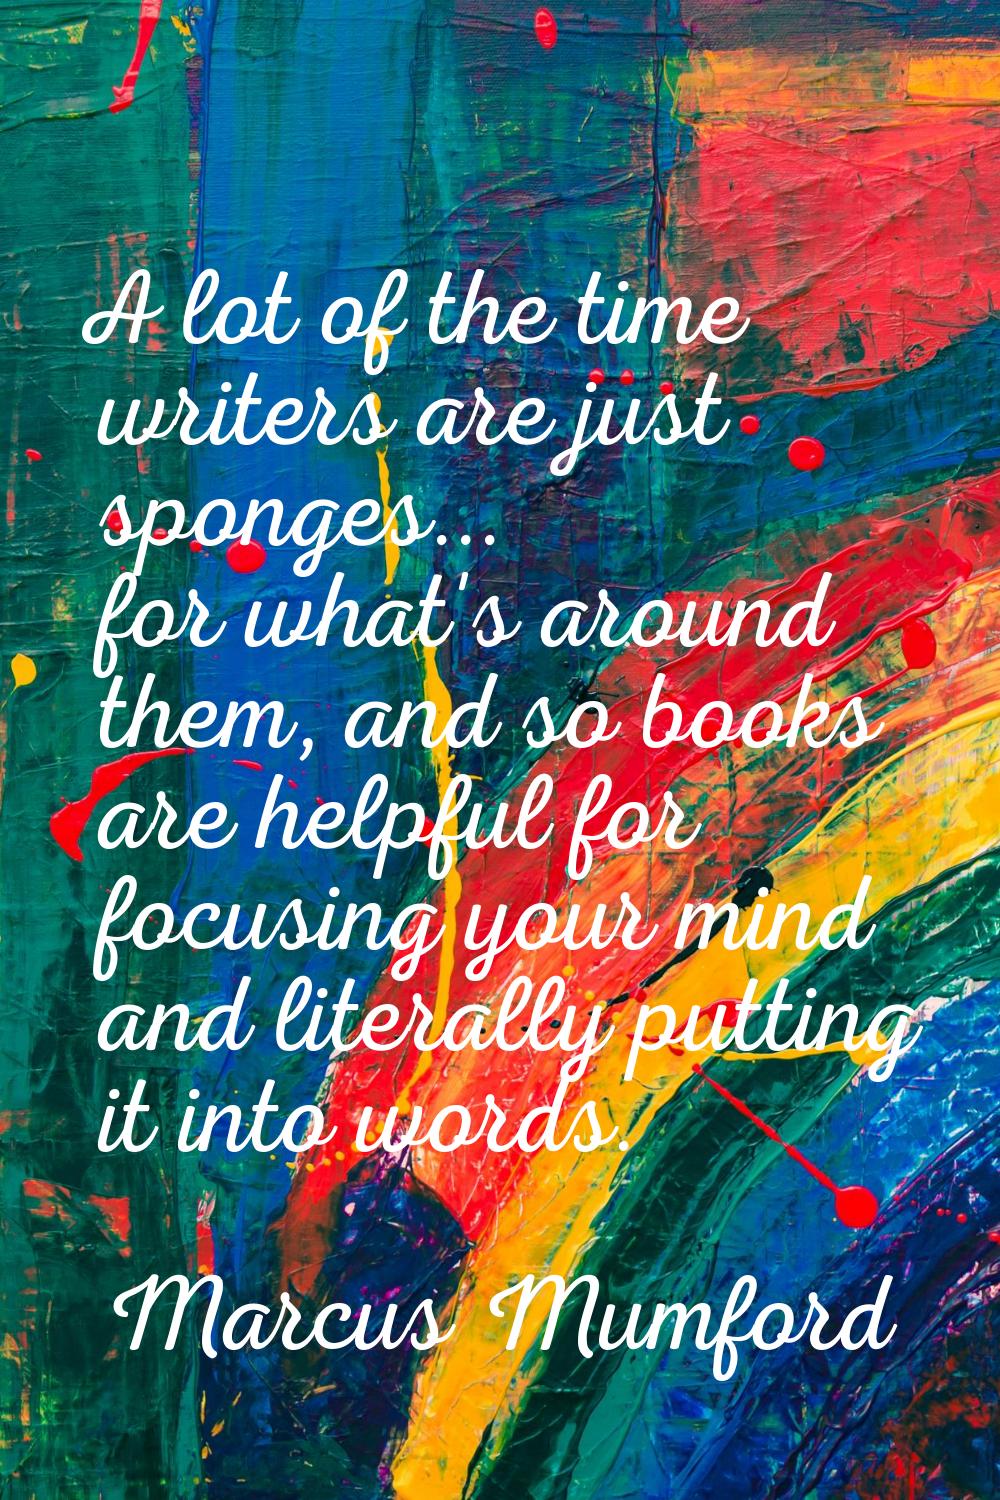 A lot of the time writers are just sponges... for what's around them, and so books are helpful for 